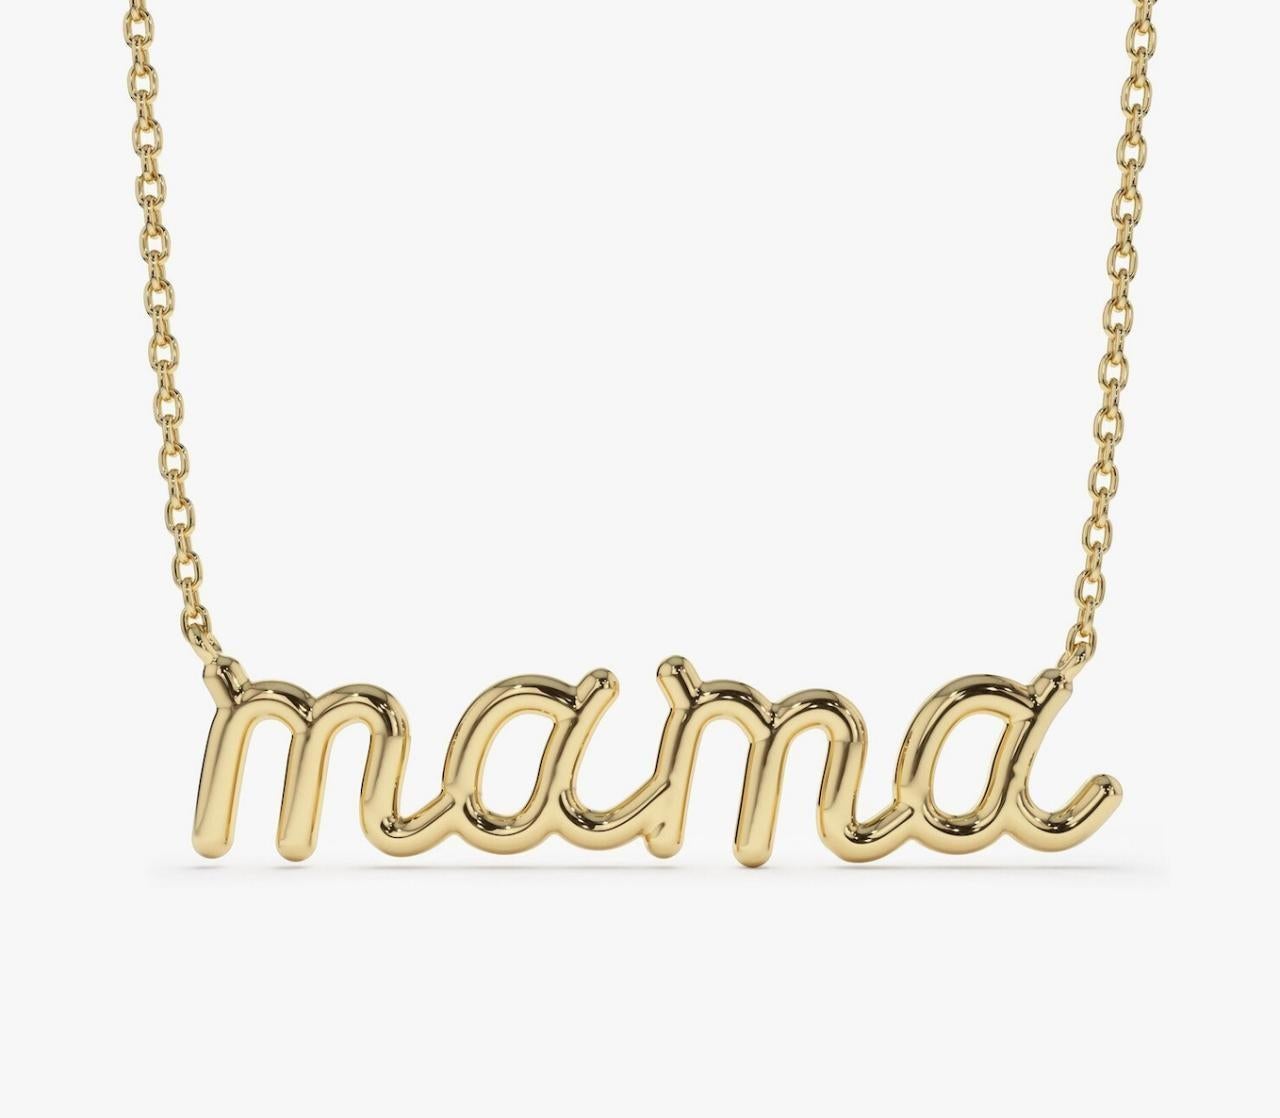 Necklace Information
Metal : 14k
Metal Color  : Yellow Gold
Dimensions : 6X28.5MM
Length : 18 Inches
Lead Time : 4-8 Weeks (If out of Stock)
 

JEWELRY CARE
Over the course of time, body oil and skin products can collect on Jewelry and leave a